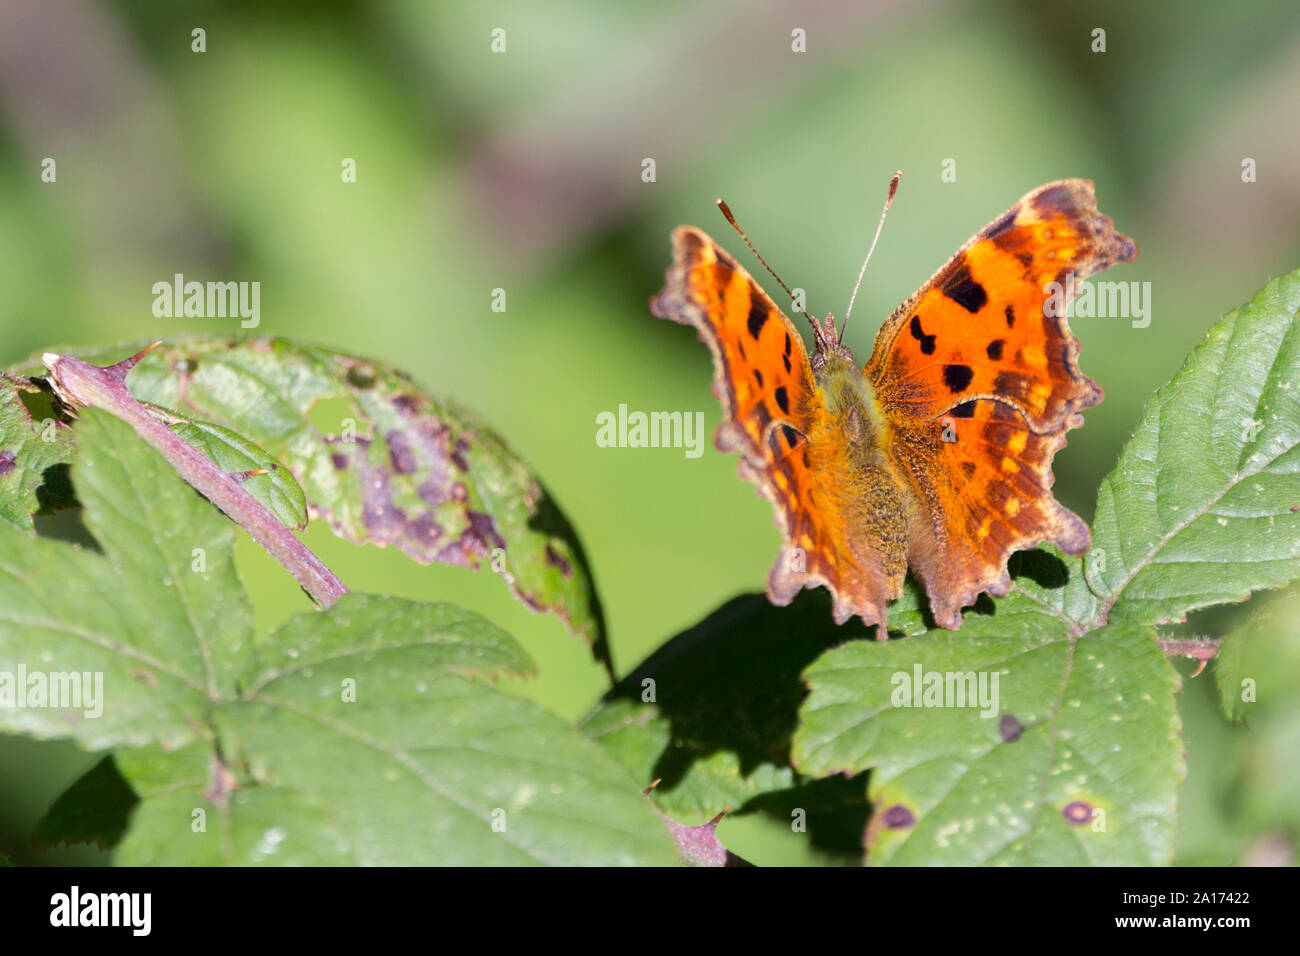 Comma butterfly (Polygonia c-album) resting on leaves. Orange brown upperwings with dark markings and distinctive ragged edges to wings. Rear view. Stock Photo